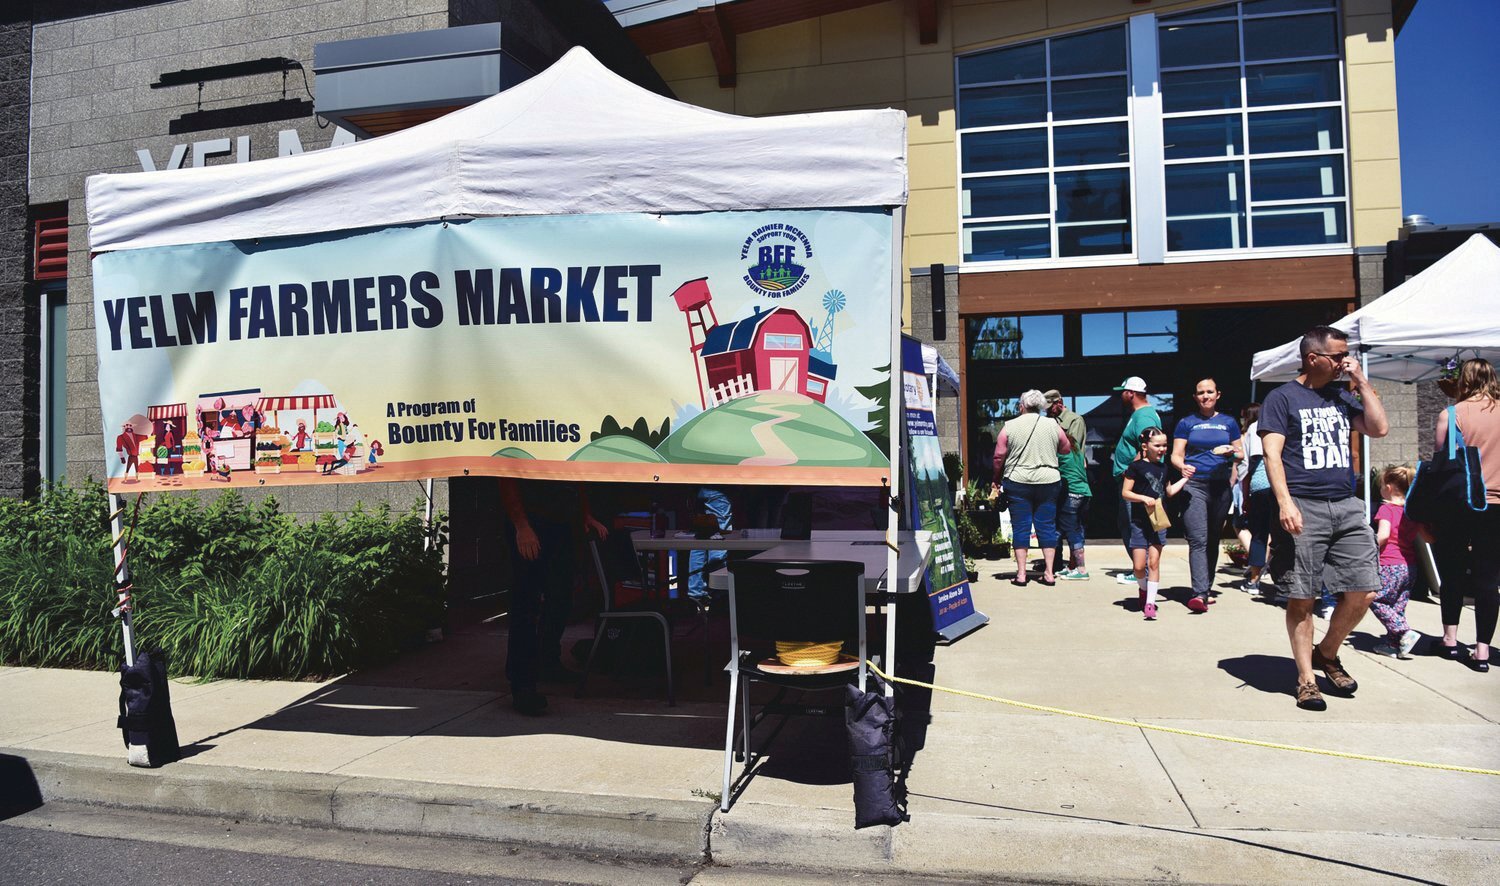 The Yelm Farmers Market will kick off its season on May 28 at the Yelm Community Center. The market will be held on every Saturday until Oct. 29.